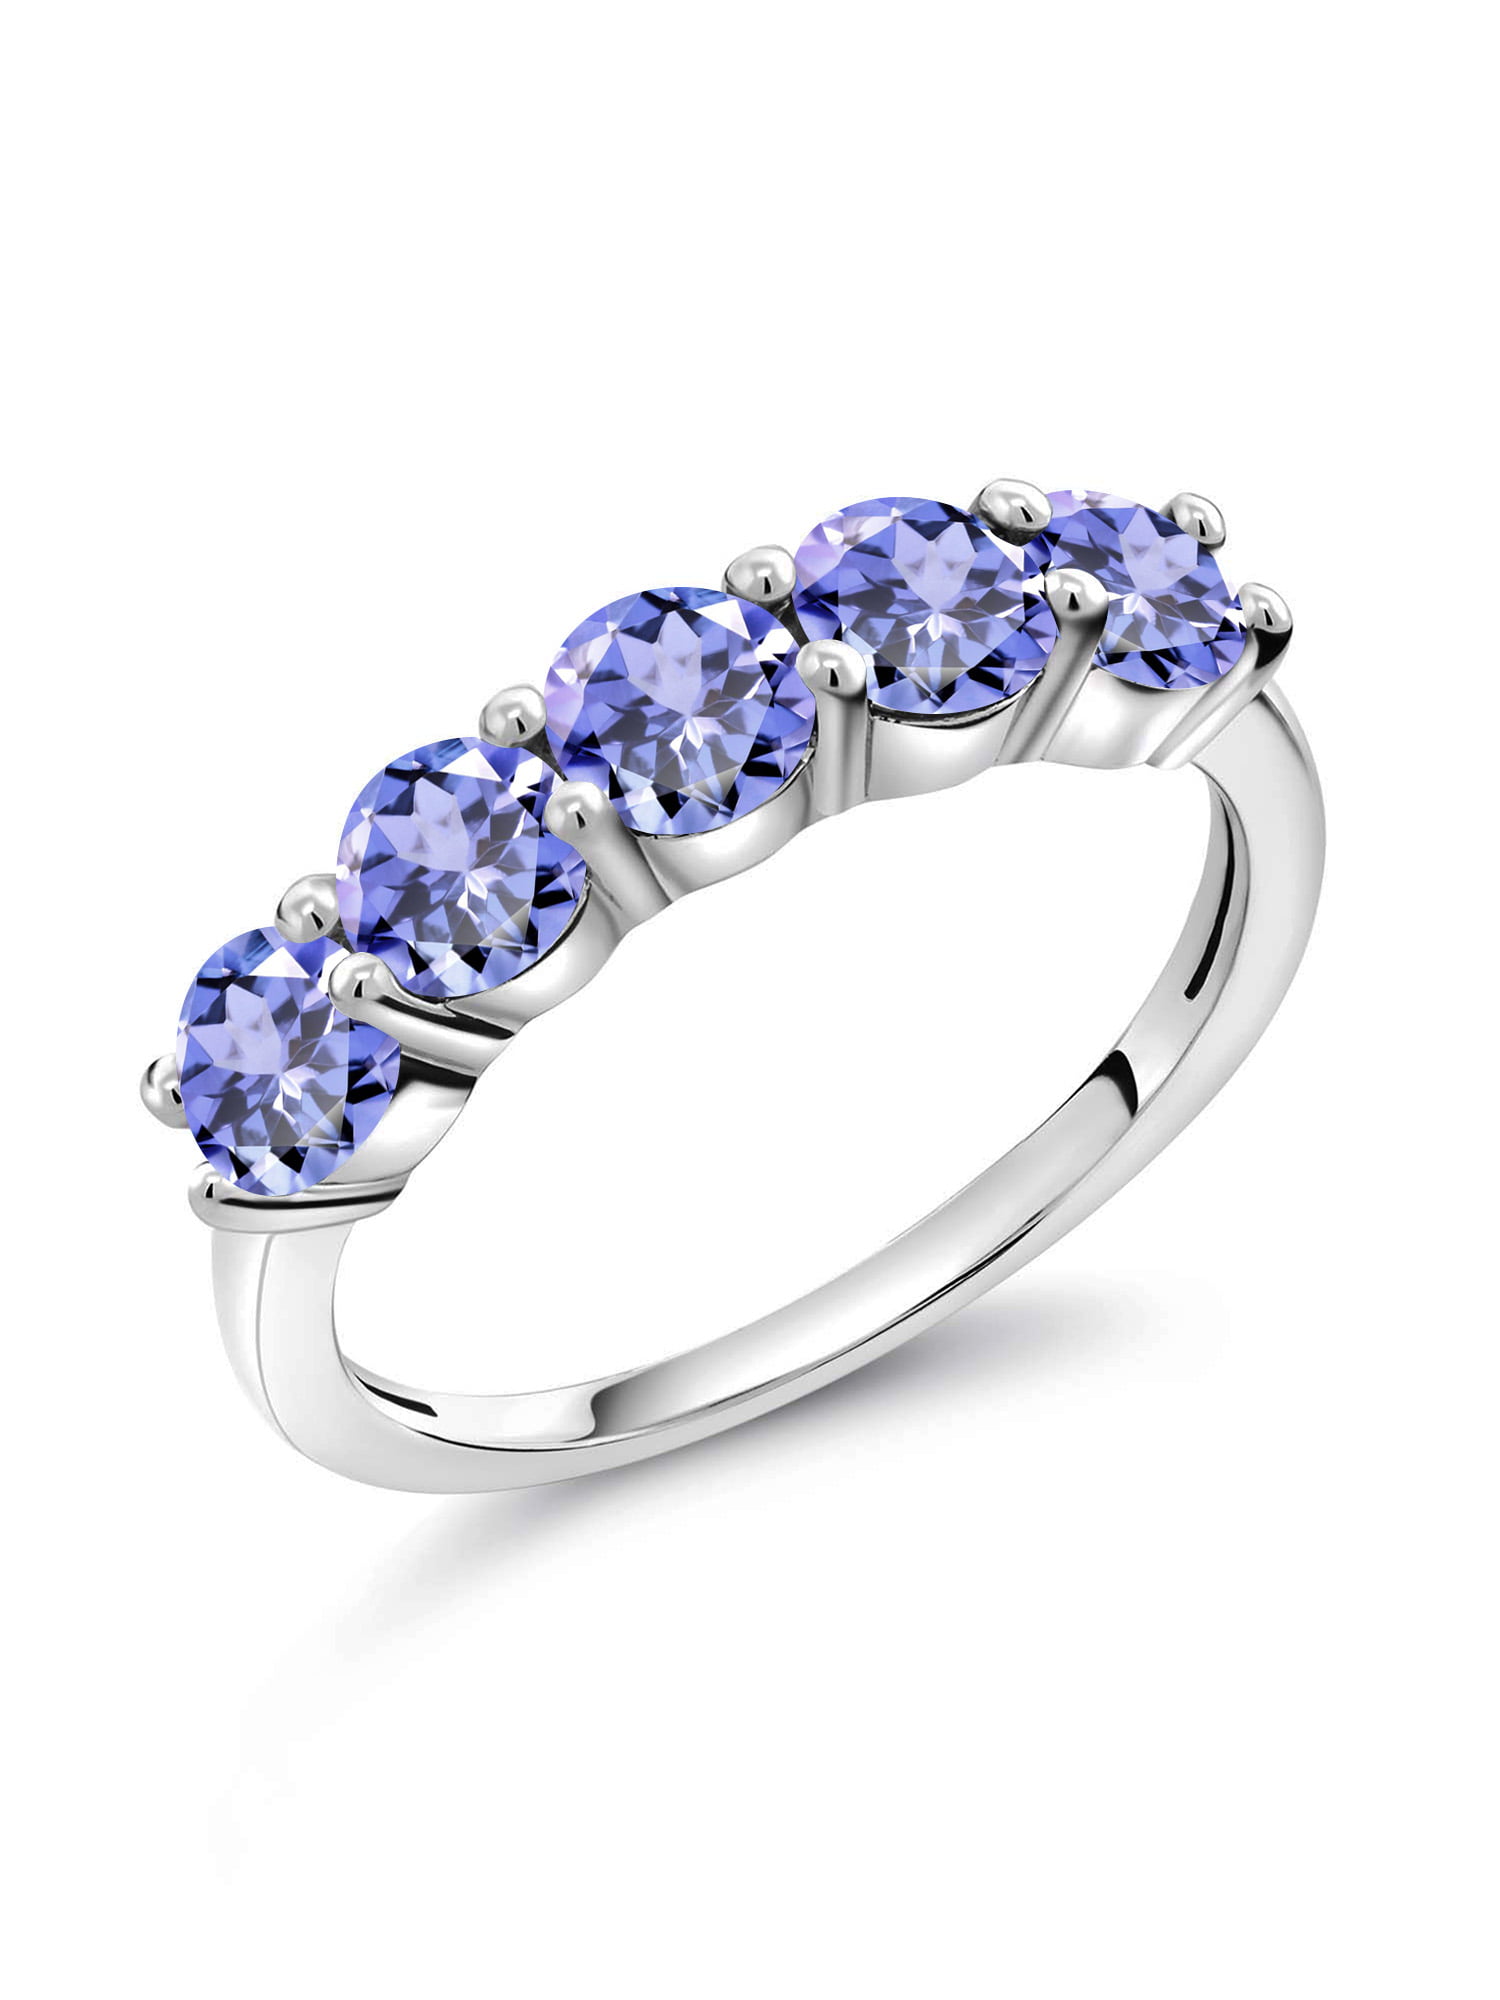 SVC-JEWELS 14k Yellow Gold Plated 925 Sterling Silver Blue Tanzanite Cluster Engagement Wedding Band Ring Mens